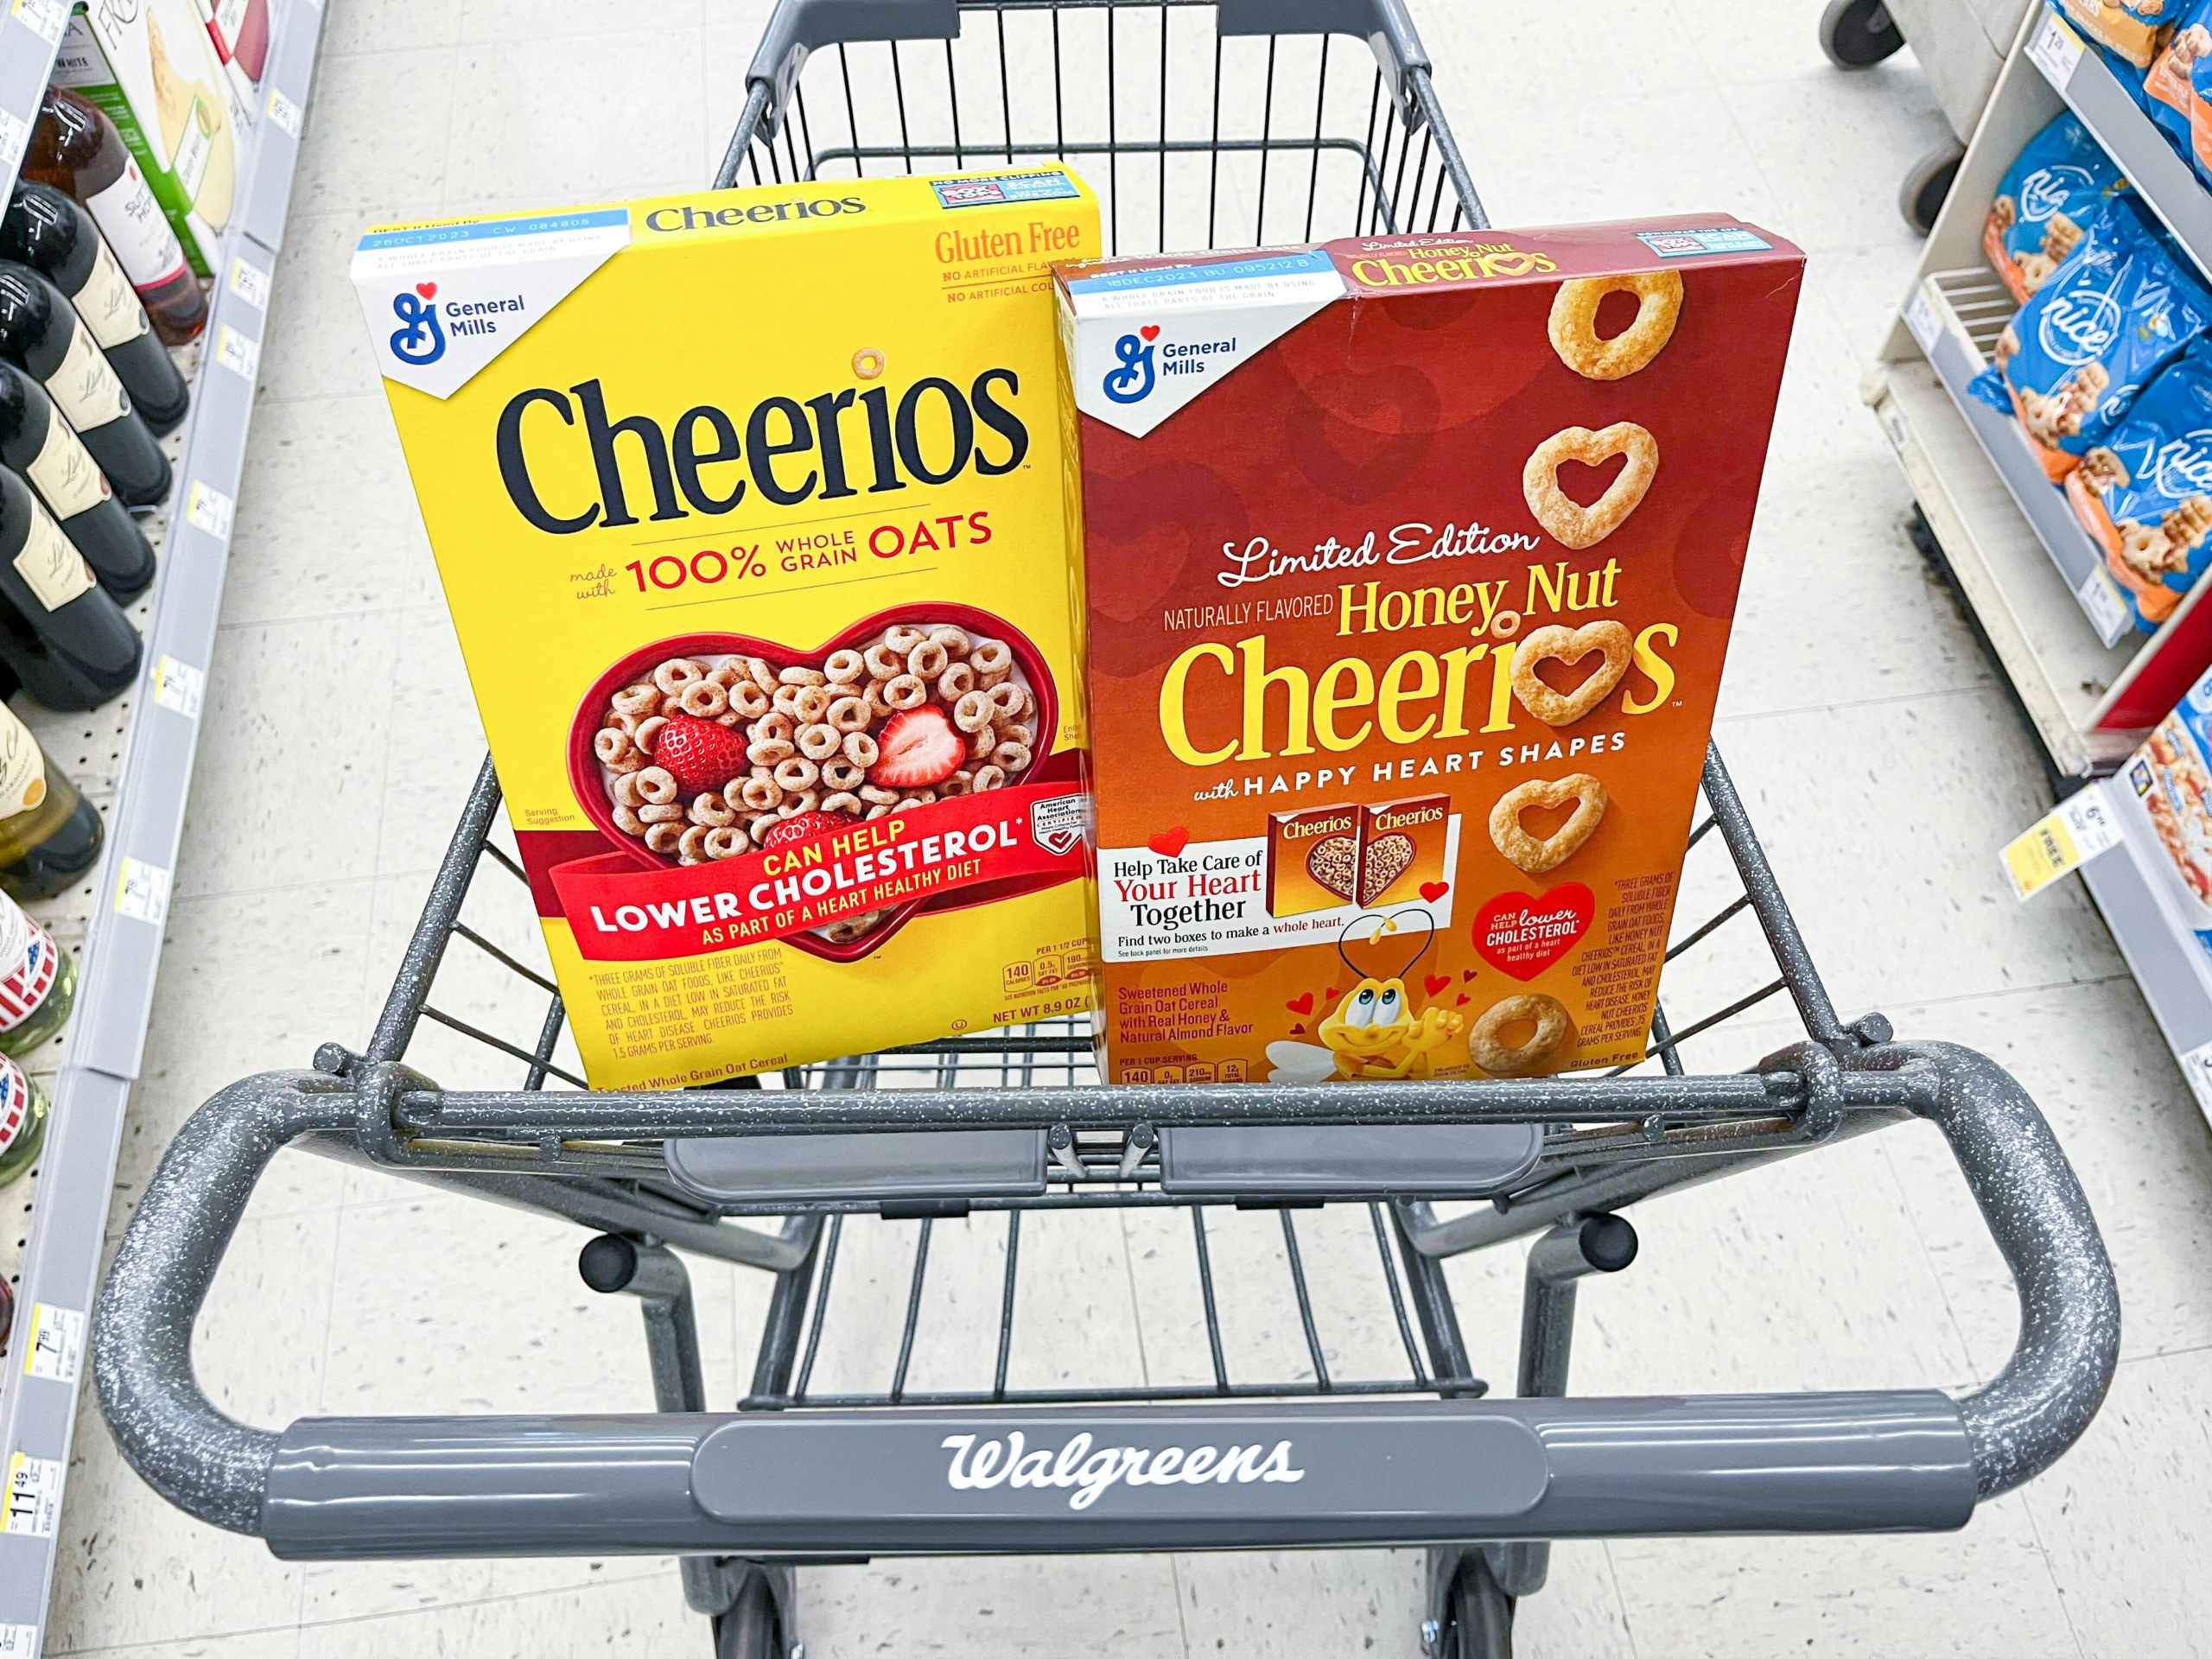 shopping cart with two boxes of General Mills Cheerios cereal inside